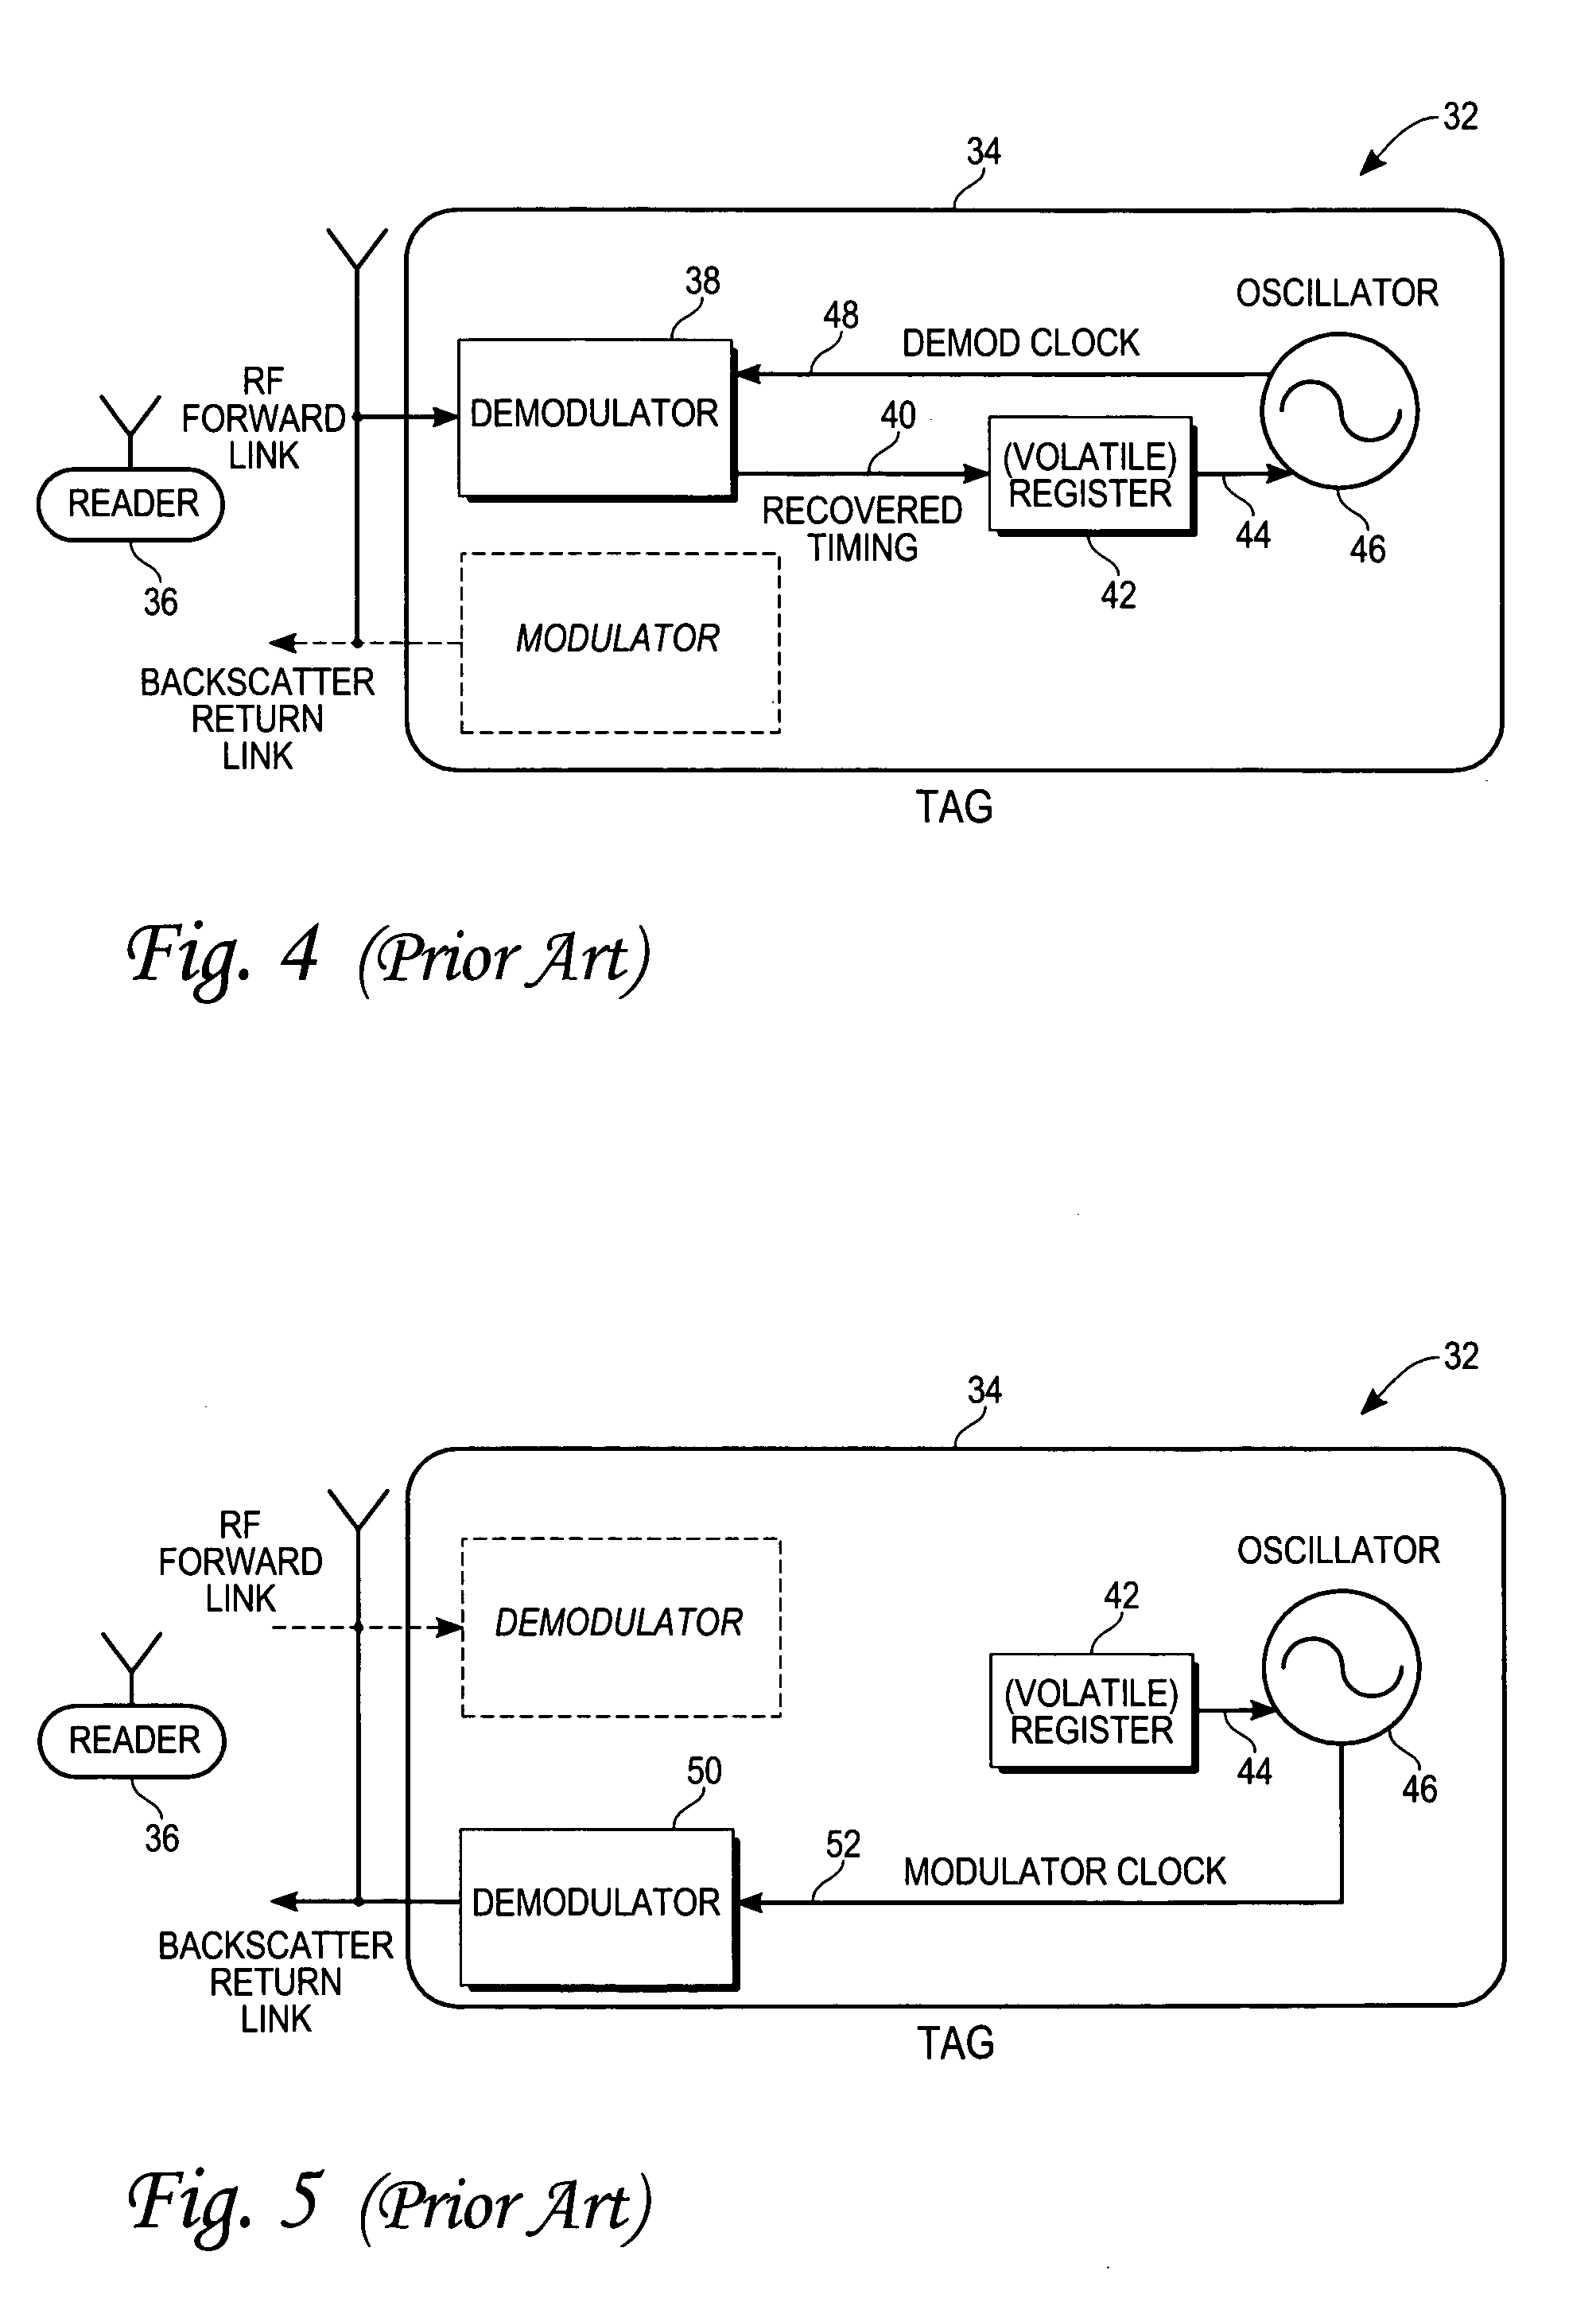 Method and system to calibrate an oscillator within an RFID circuit utilizing a test signal supplied to the RFID circuit